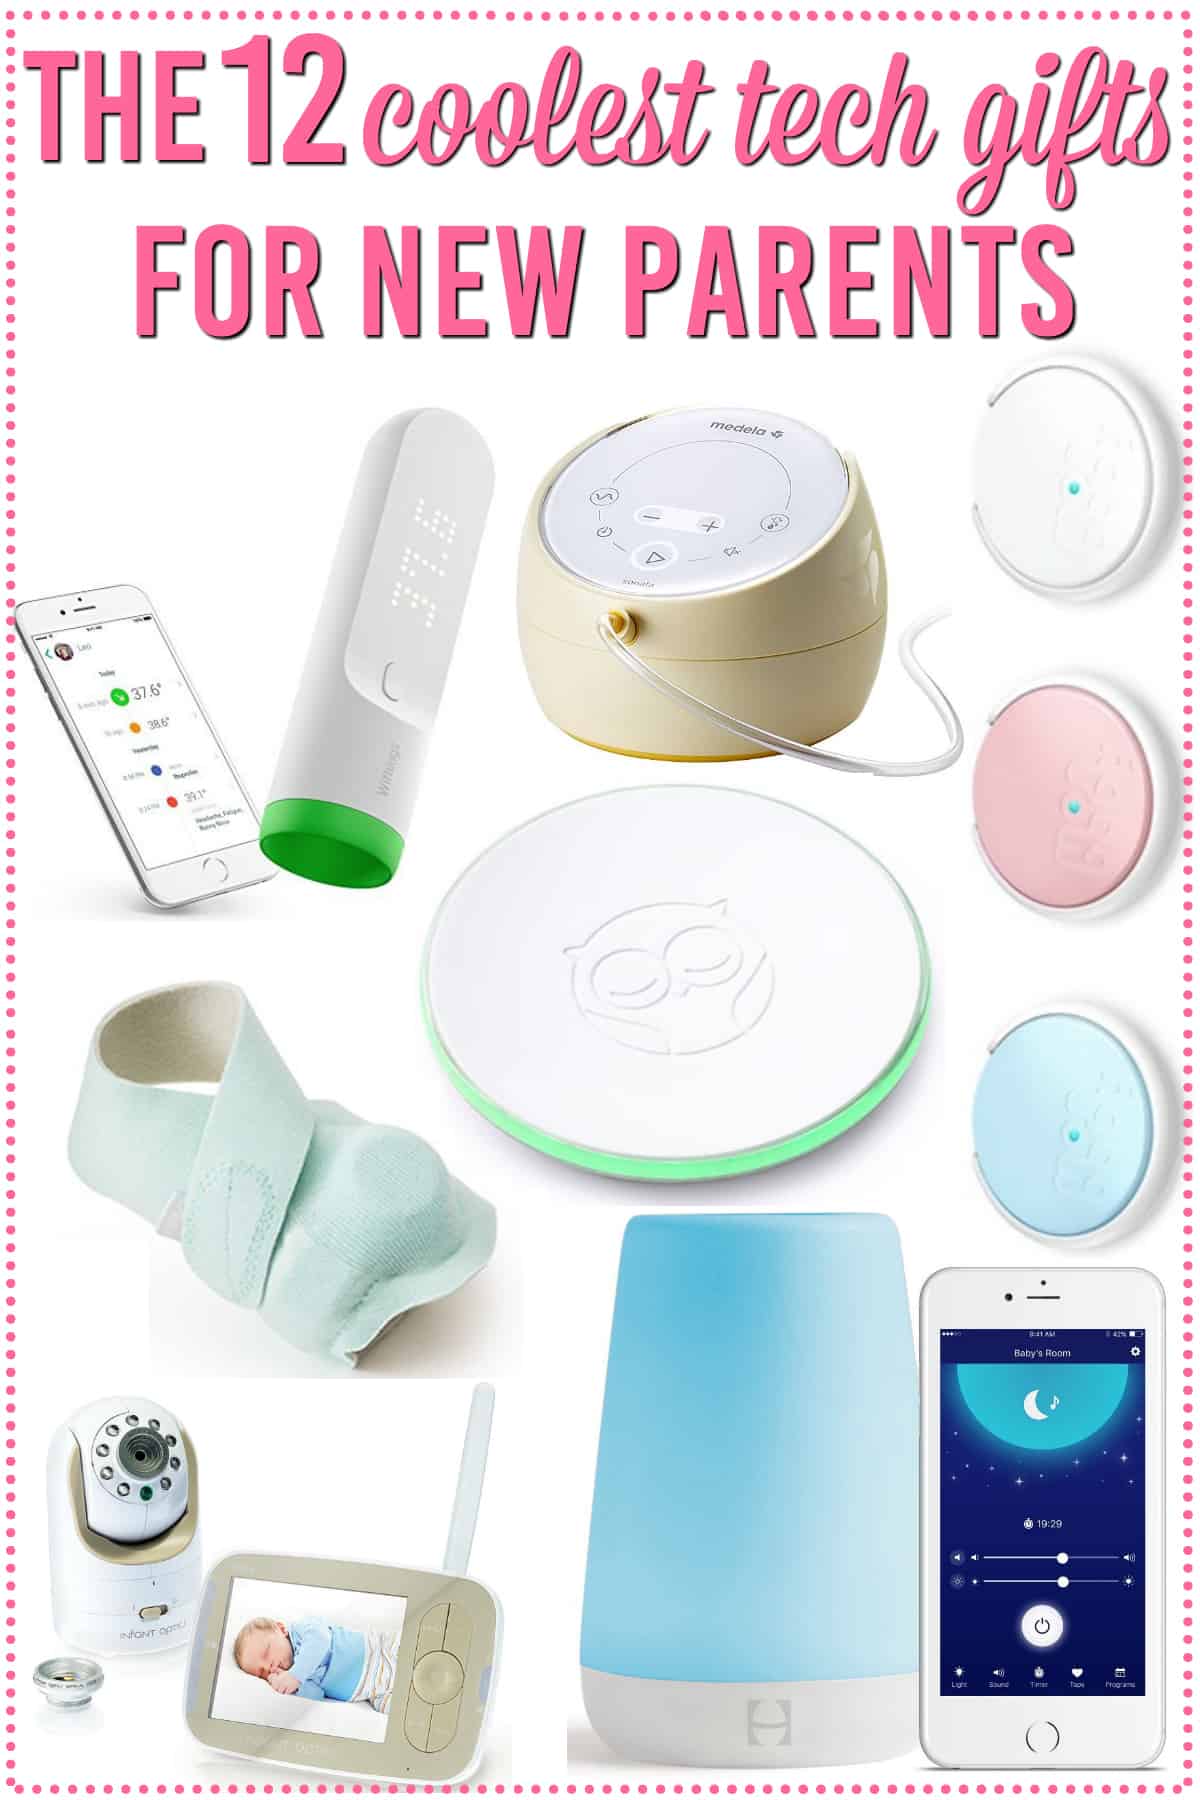 Assorted technology gift ideas for new parents